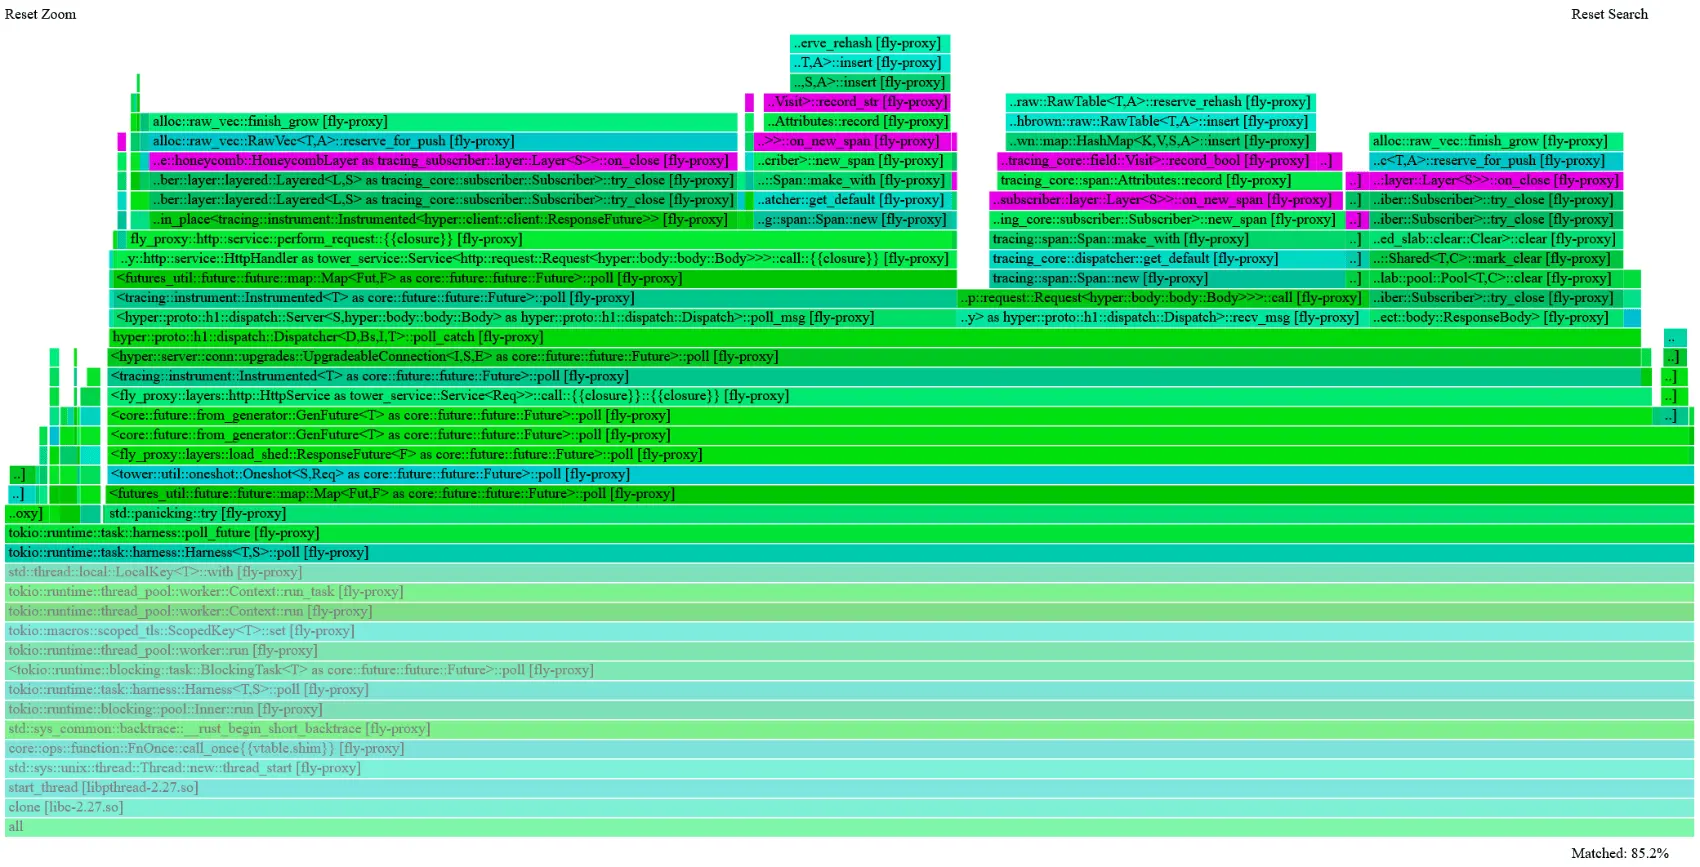 The same flamegraph after clicking on "LocalKey::with", which made it and all its children (above it) full-width. We now see more clearly that all the allocations go through HoneycombLayer.